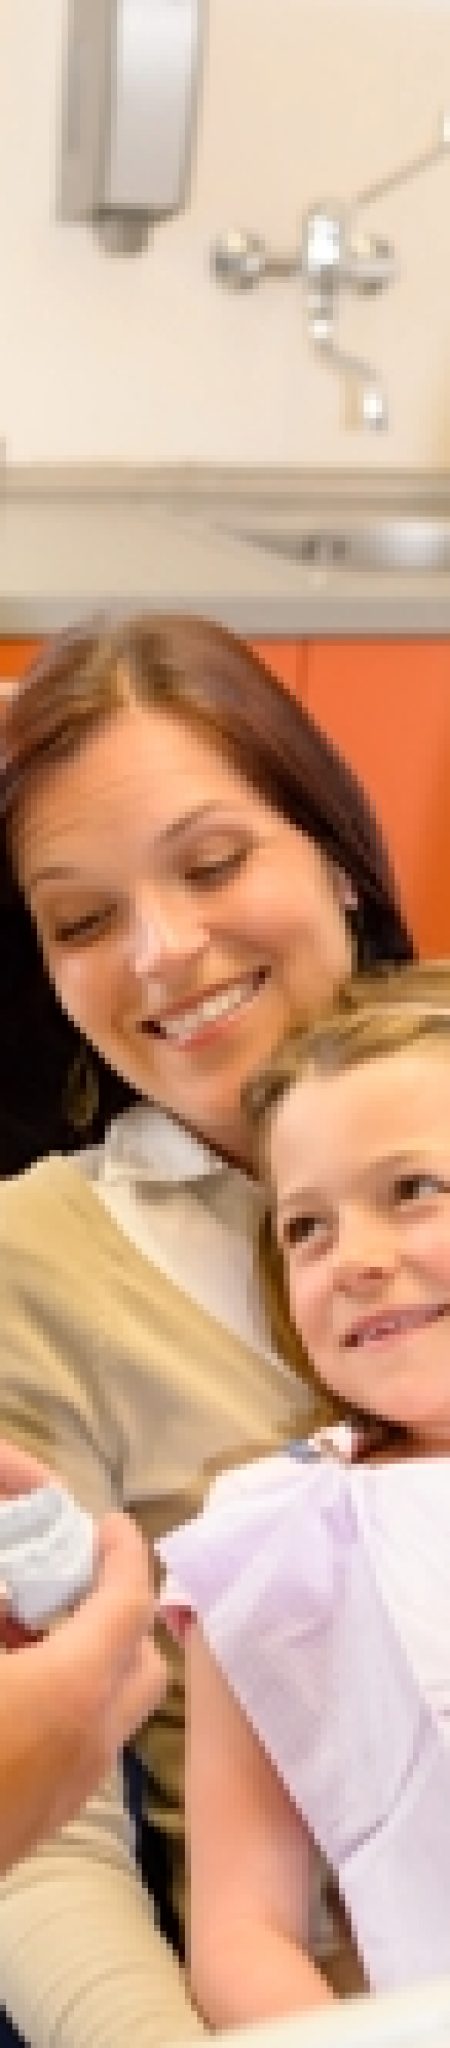 Qualities to Seek in a Family Dentist